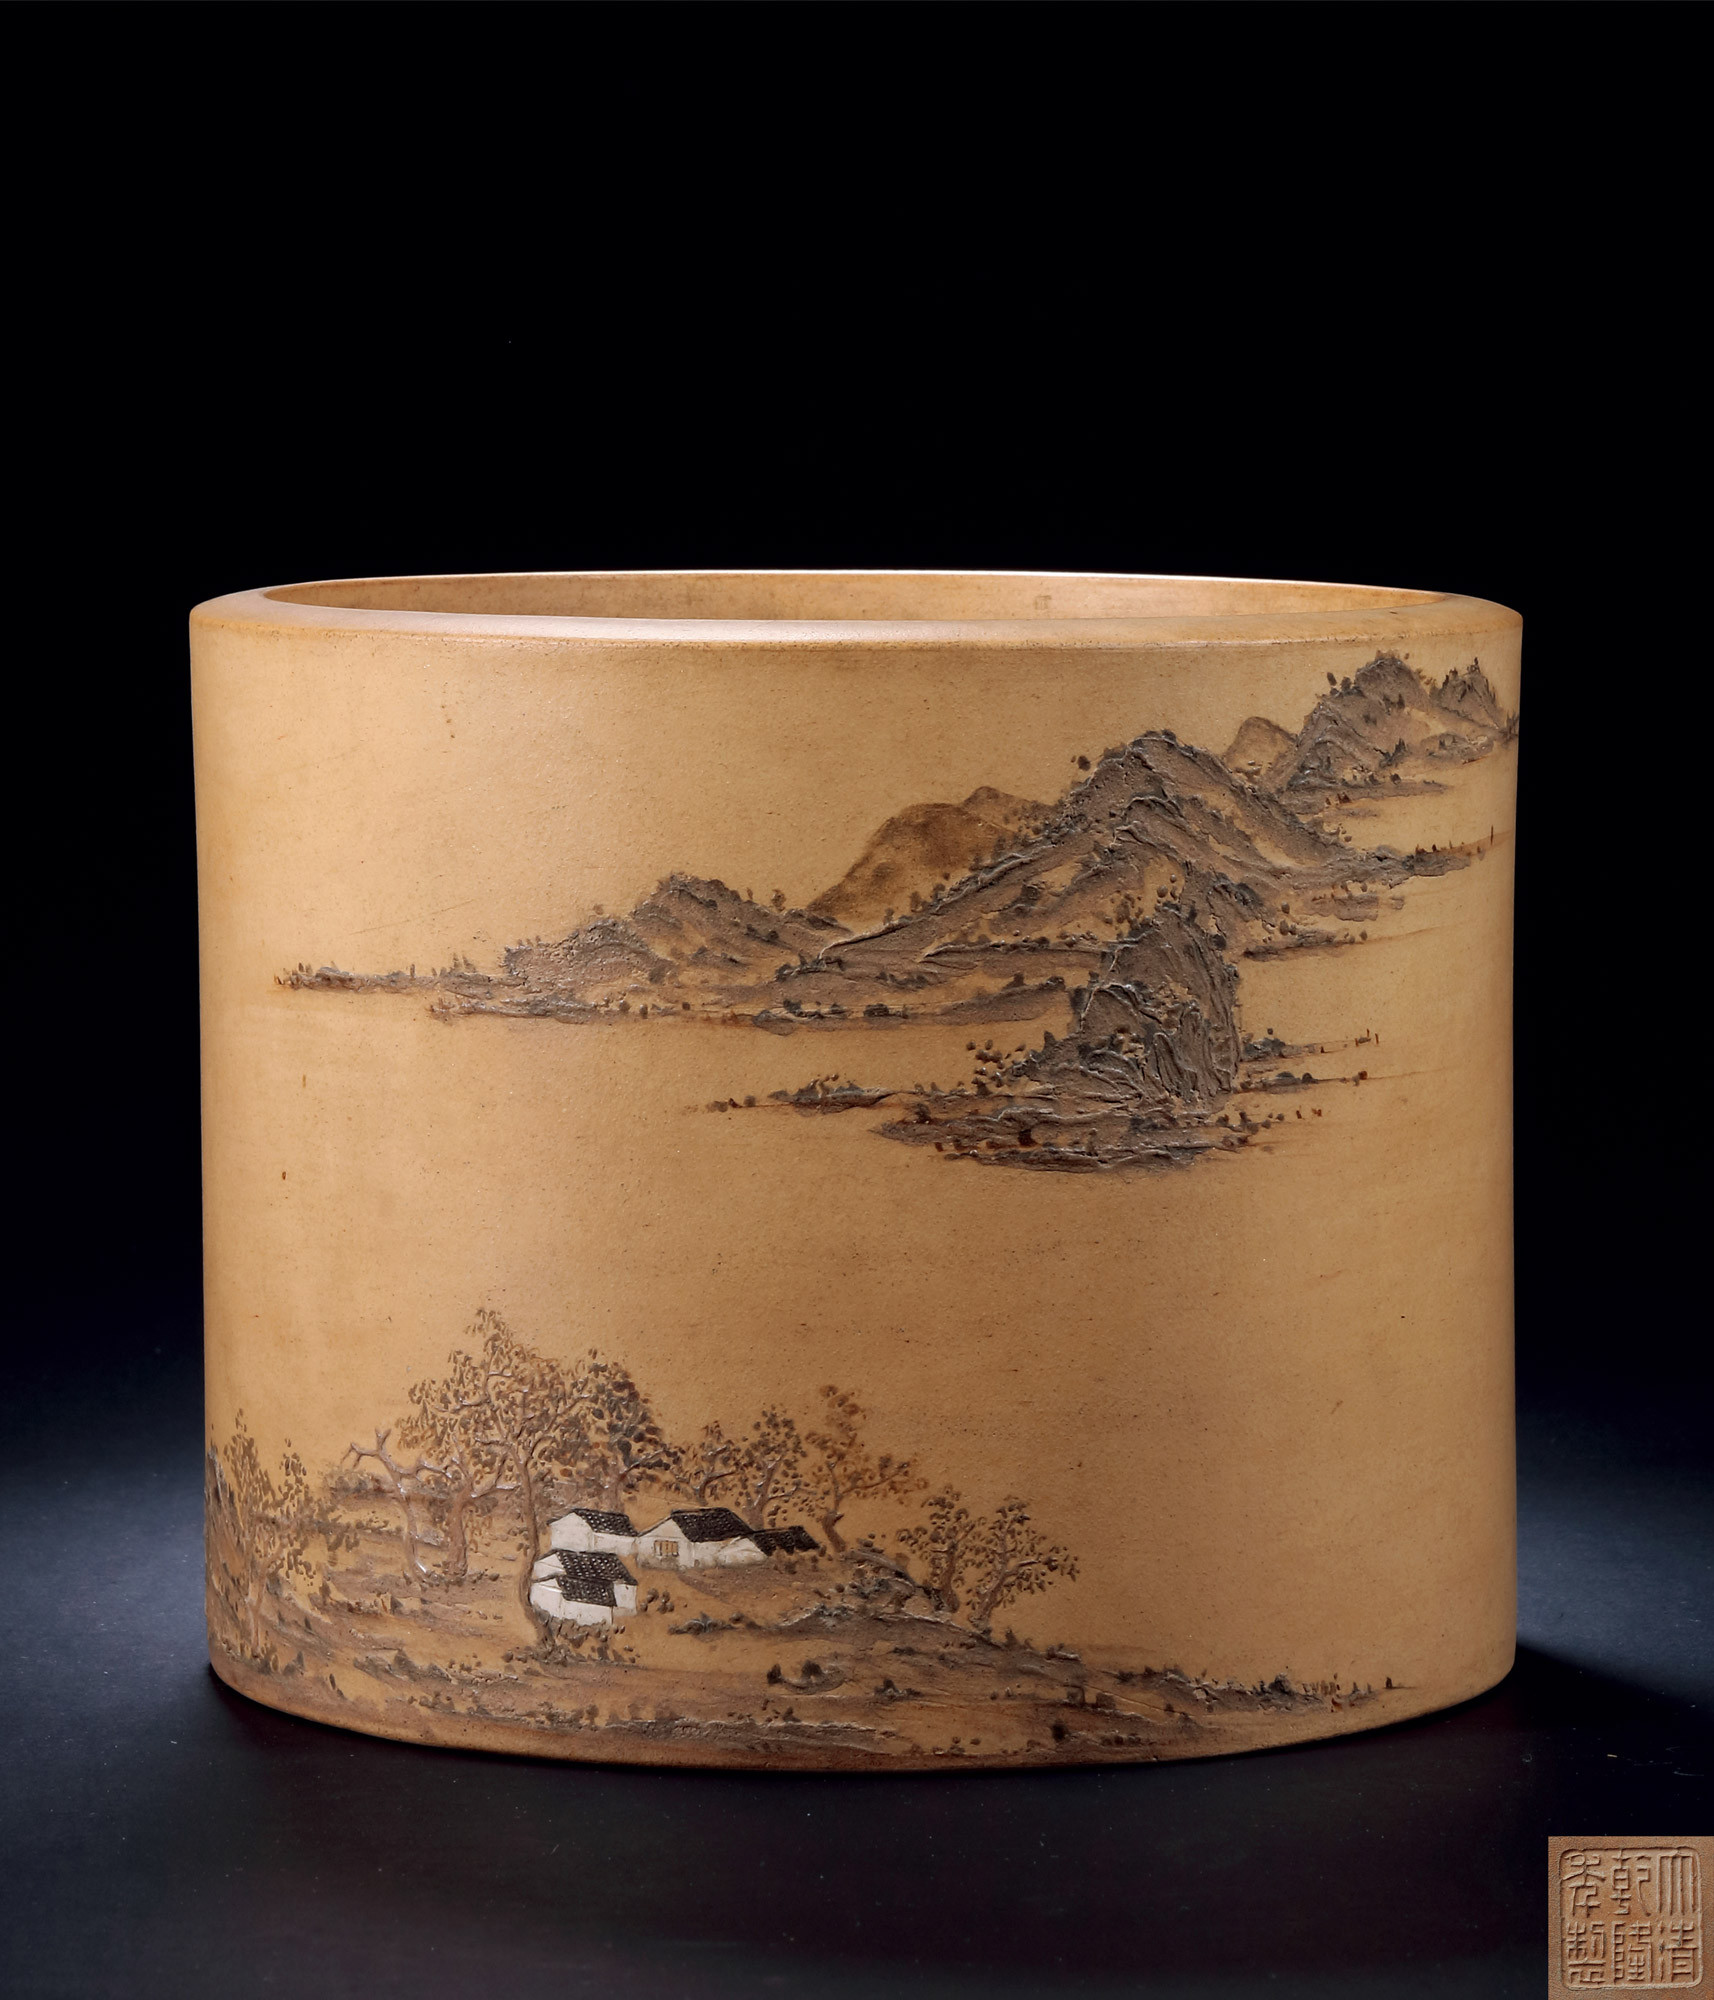 AN EXTREMELY RARE AND IMPERIAL ZISHA CLAY BRUSH POT